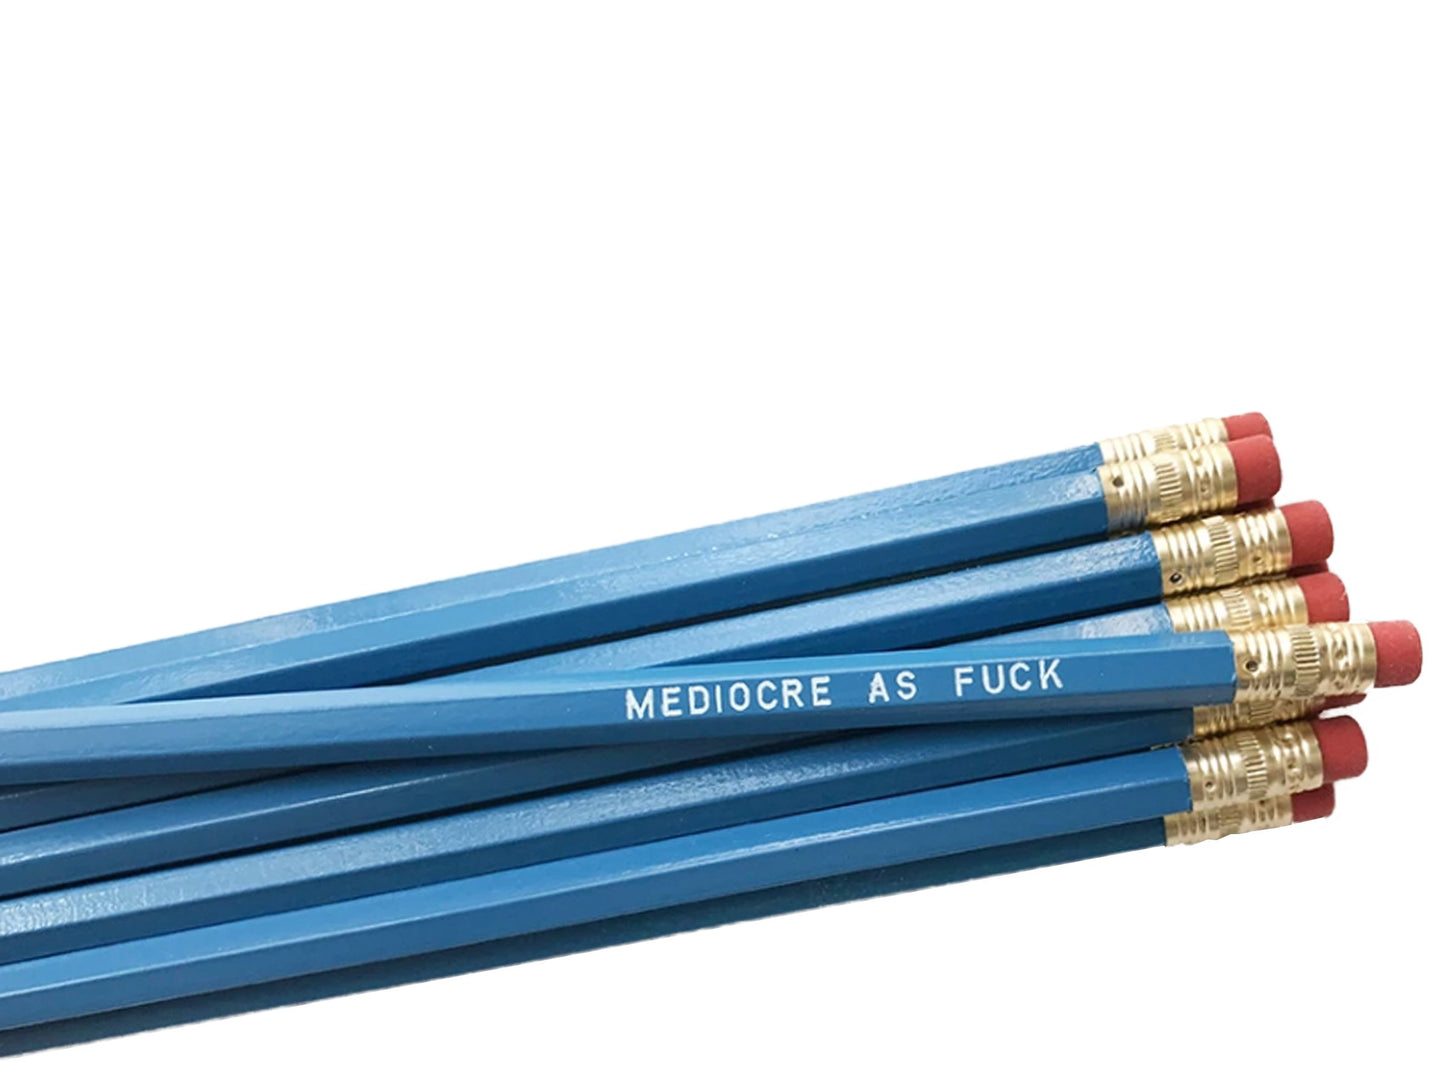 by Sweet Perversion  Listing for one Mediocre As Fuck Pencil. Wood pencil with #2 lead, certified non-toxic, latex-free synthetic eraser & unsharpened.